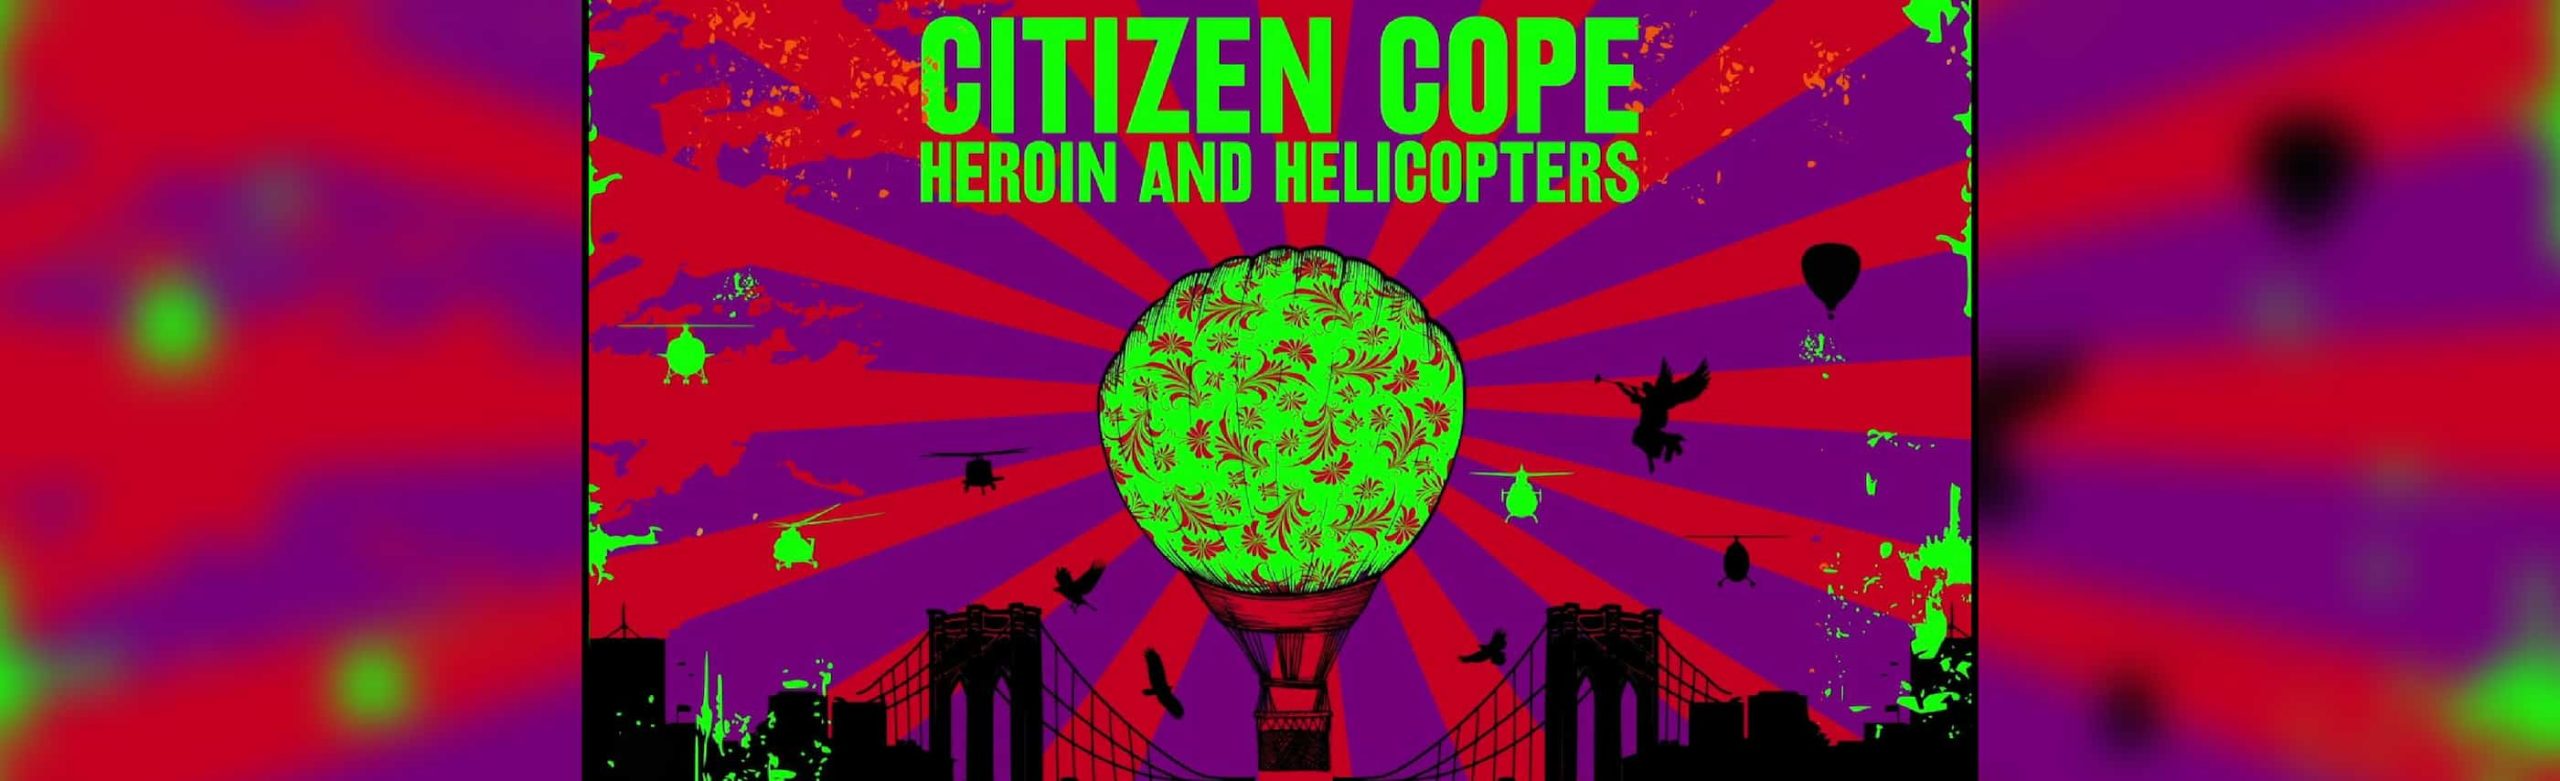 Citizen Cope Unveils Long Awaited New Album ‘Heroin and Helicopters’ Image